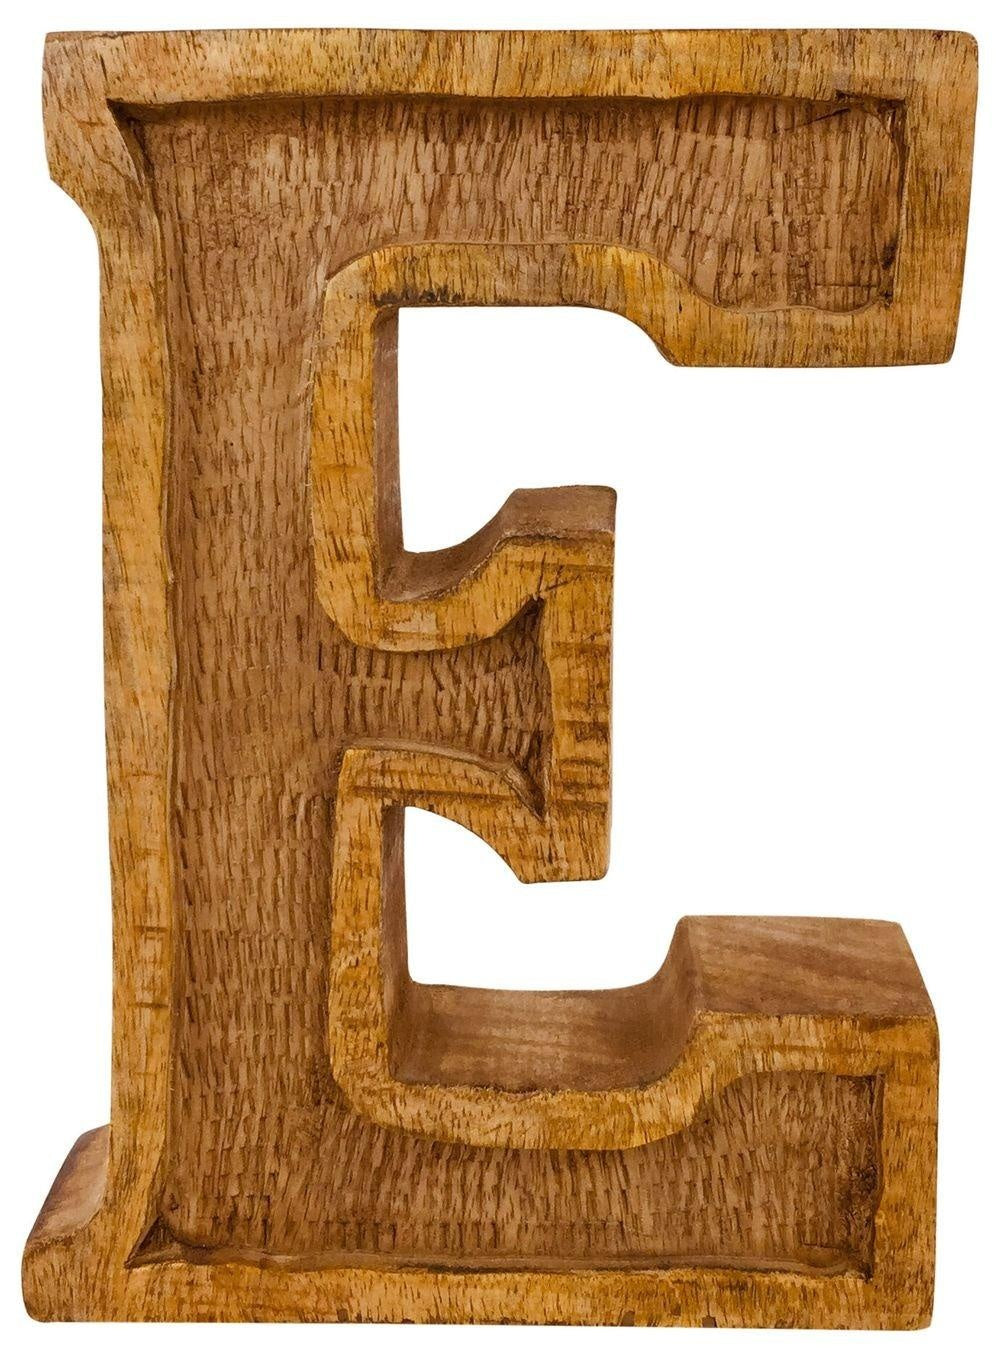 Hand Carved Wooden Embossed Letter E